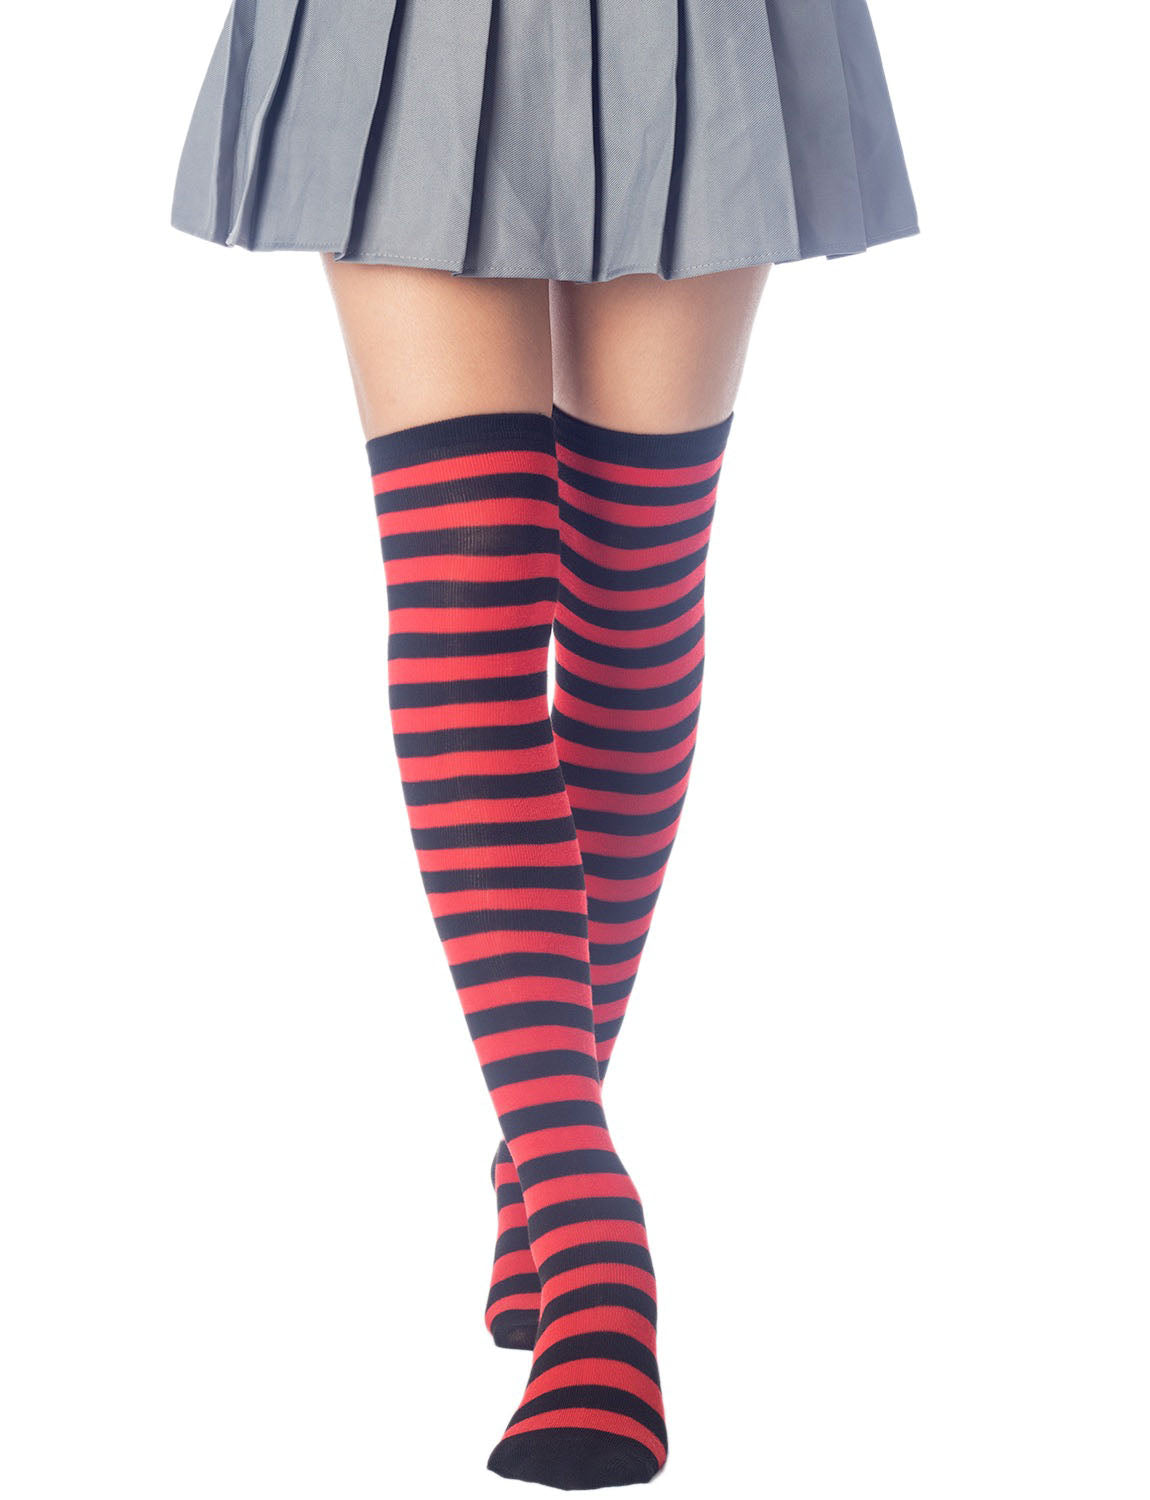 Women's Zebra Stripes Sports Casual Over The Knee Hold-up Thigh High Long Socks